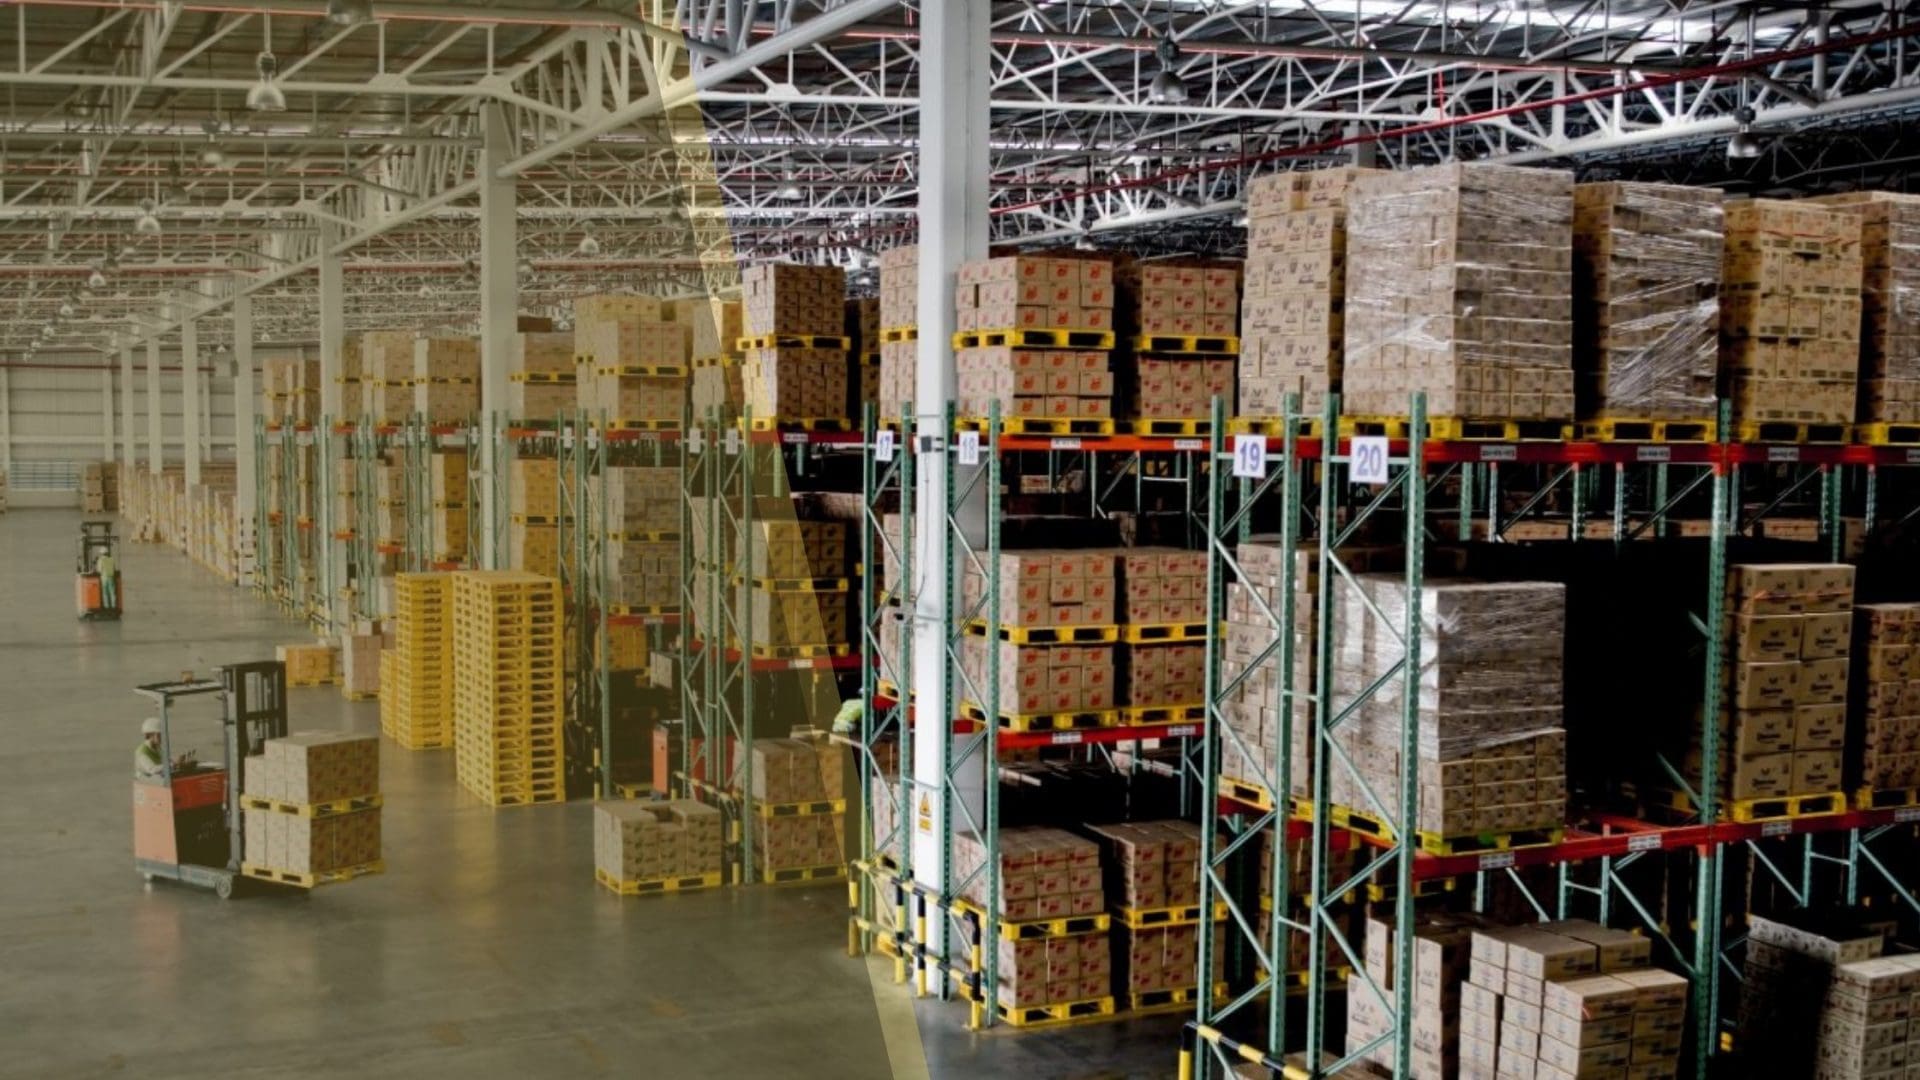 5 Top Risks Of Why Warehouses Are Taking Over The U.S. (4)